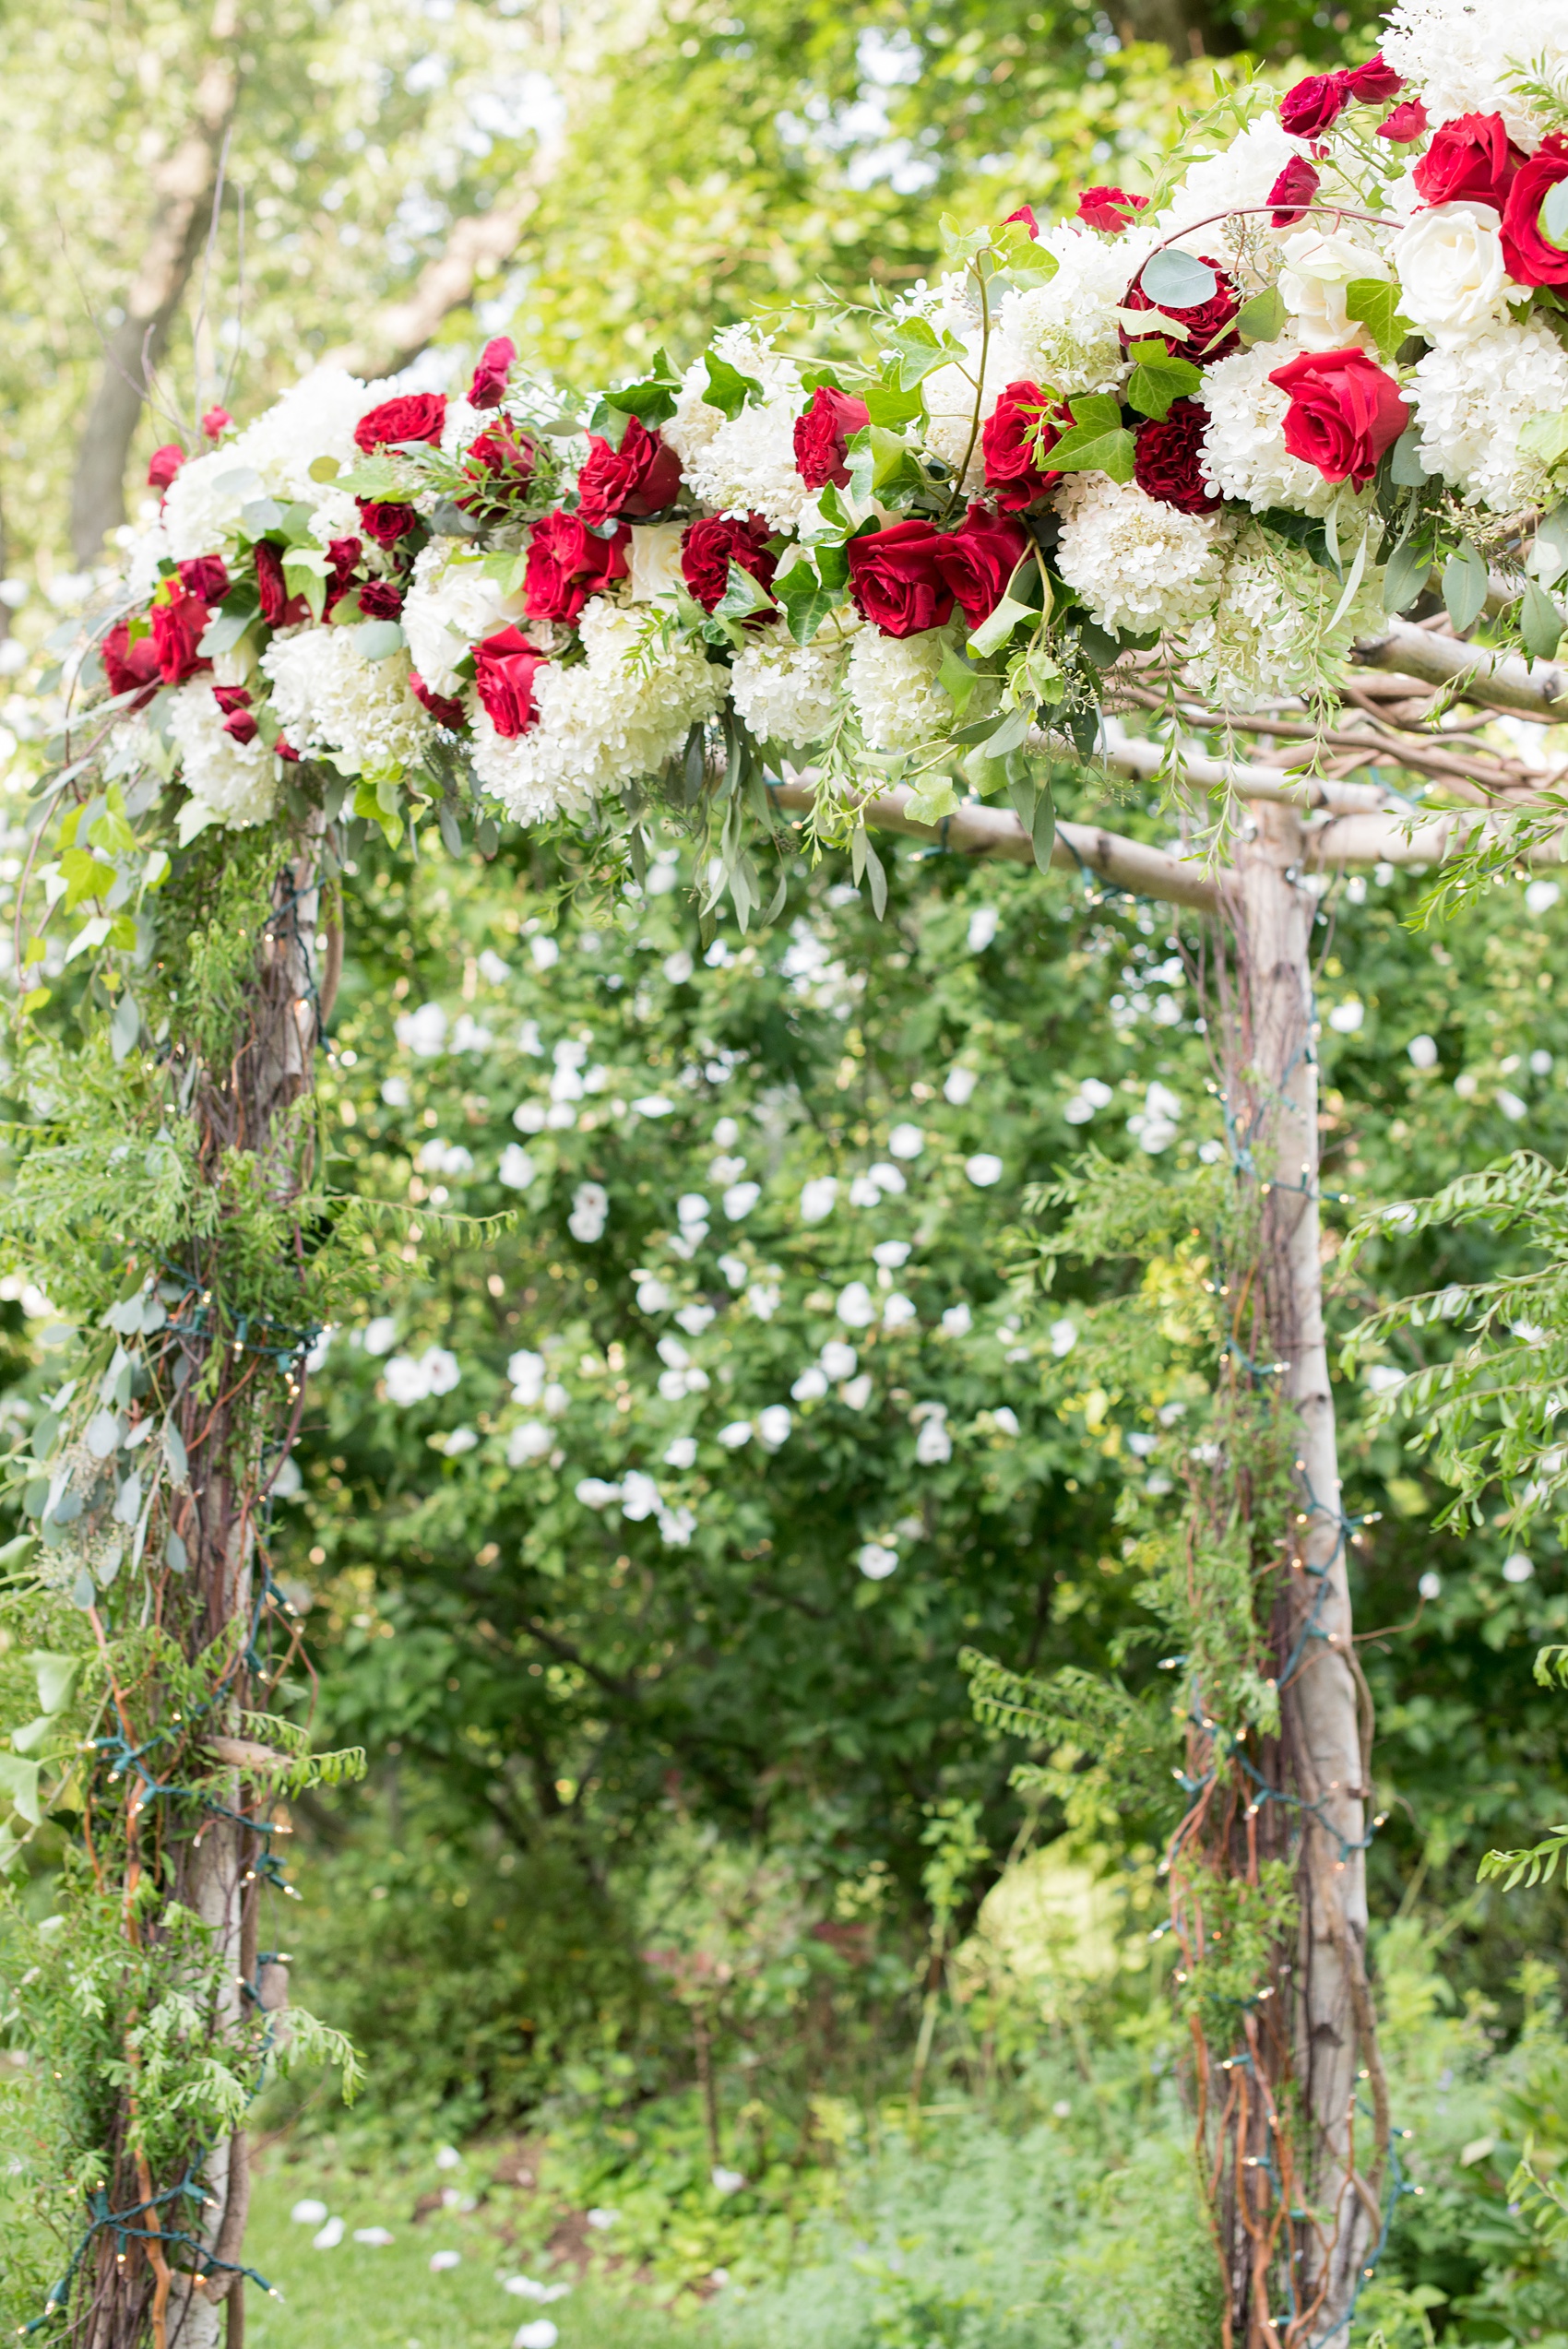 Wedding photos at Crabtree's Kittle House in Chappaqua, New York by Mikkel Paige Photography. This venue in Westchester county is a beautiful location for an outdoor summer wedding. The ceremony was overlooking pretty scenery and the couple got married under a branch chuppah/arbor decorated with red and white flowers. Click through for more inspiration from their day! #mikkelpaige #CrabtreesKittleHouse #WestchesterWeddingVenues #WestchesterWedding #summerwedding #weddingceremony #weddingaltar #chuppah #outdoorceremony